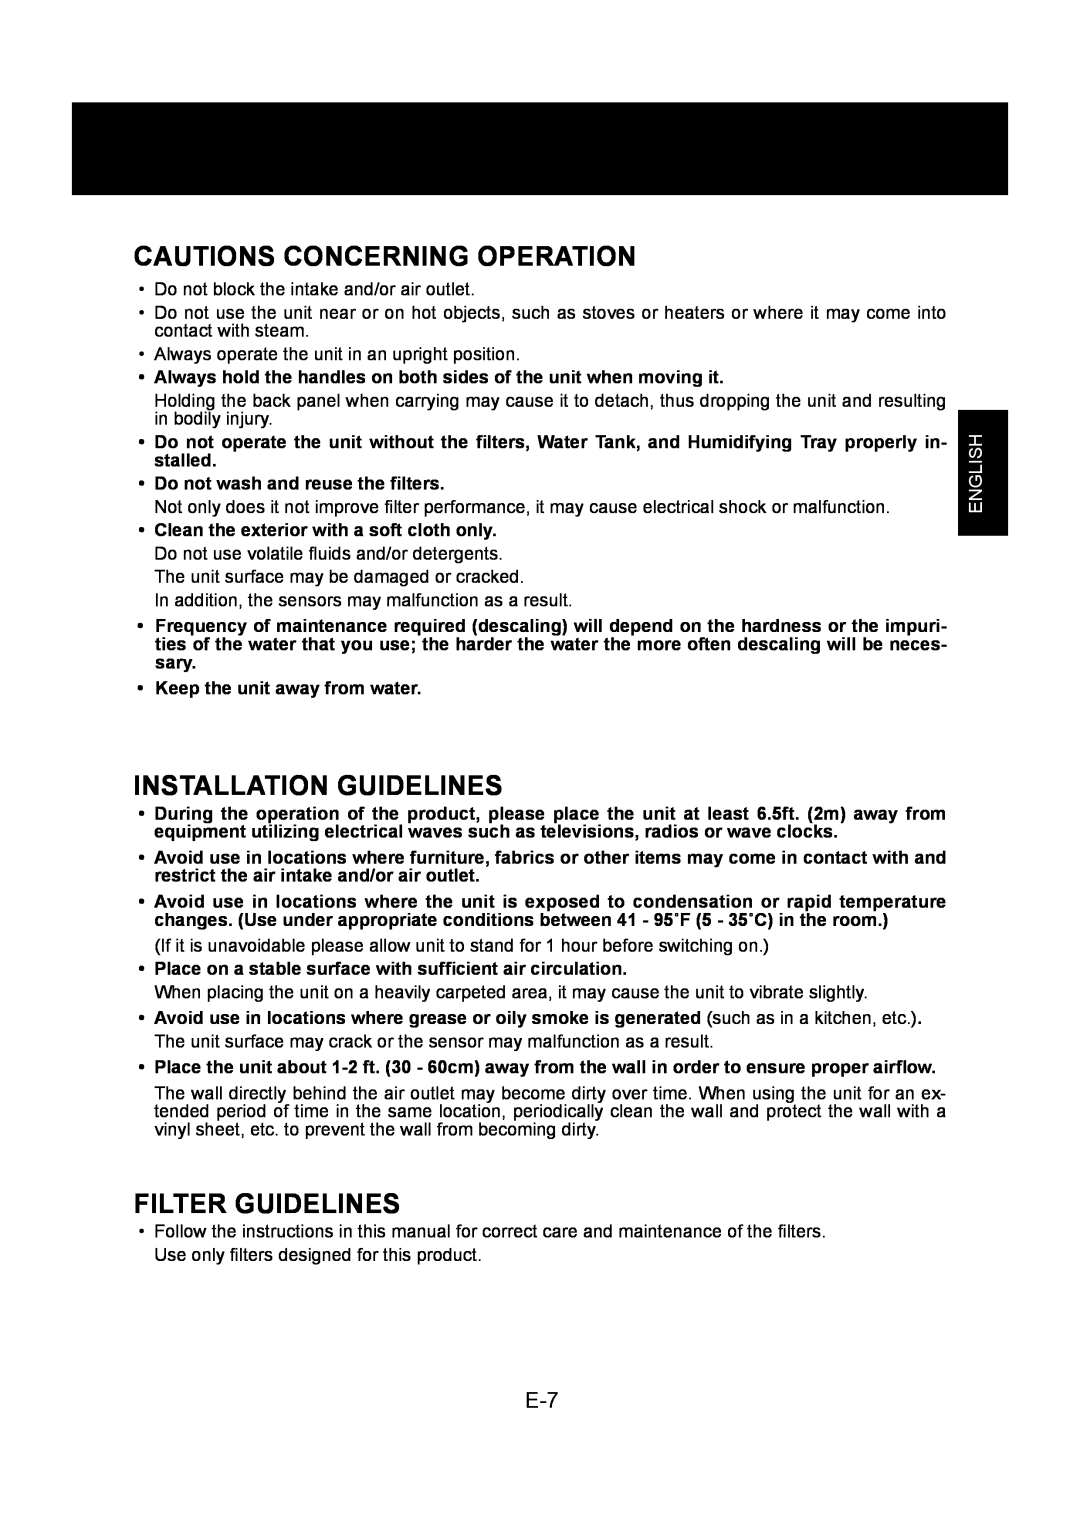 Sharp KC-830U operation manual Cautions Concerning Operation, Installation Guidelines, Filter Guidelines, English 